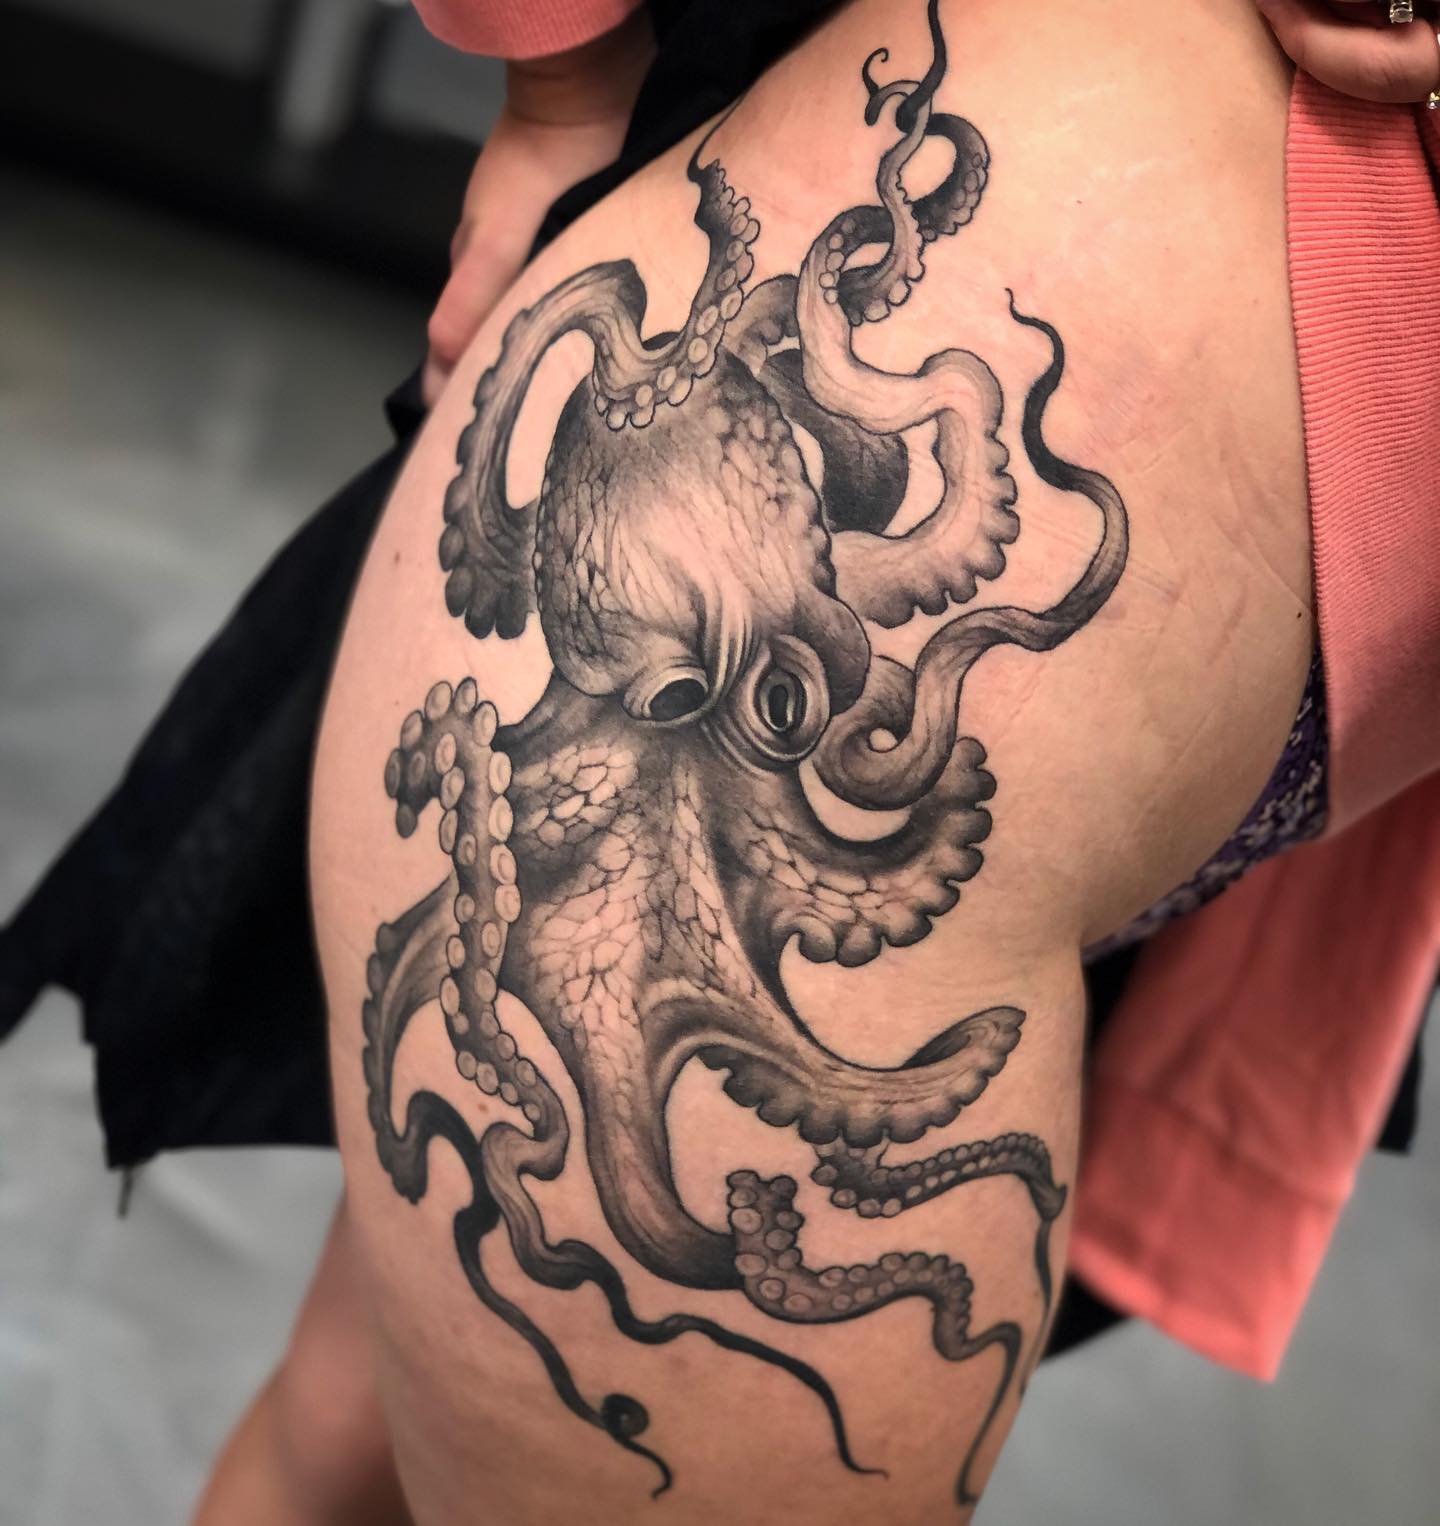 Sketch work style octopus tattoo on the right thigh